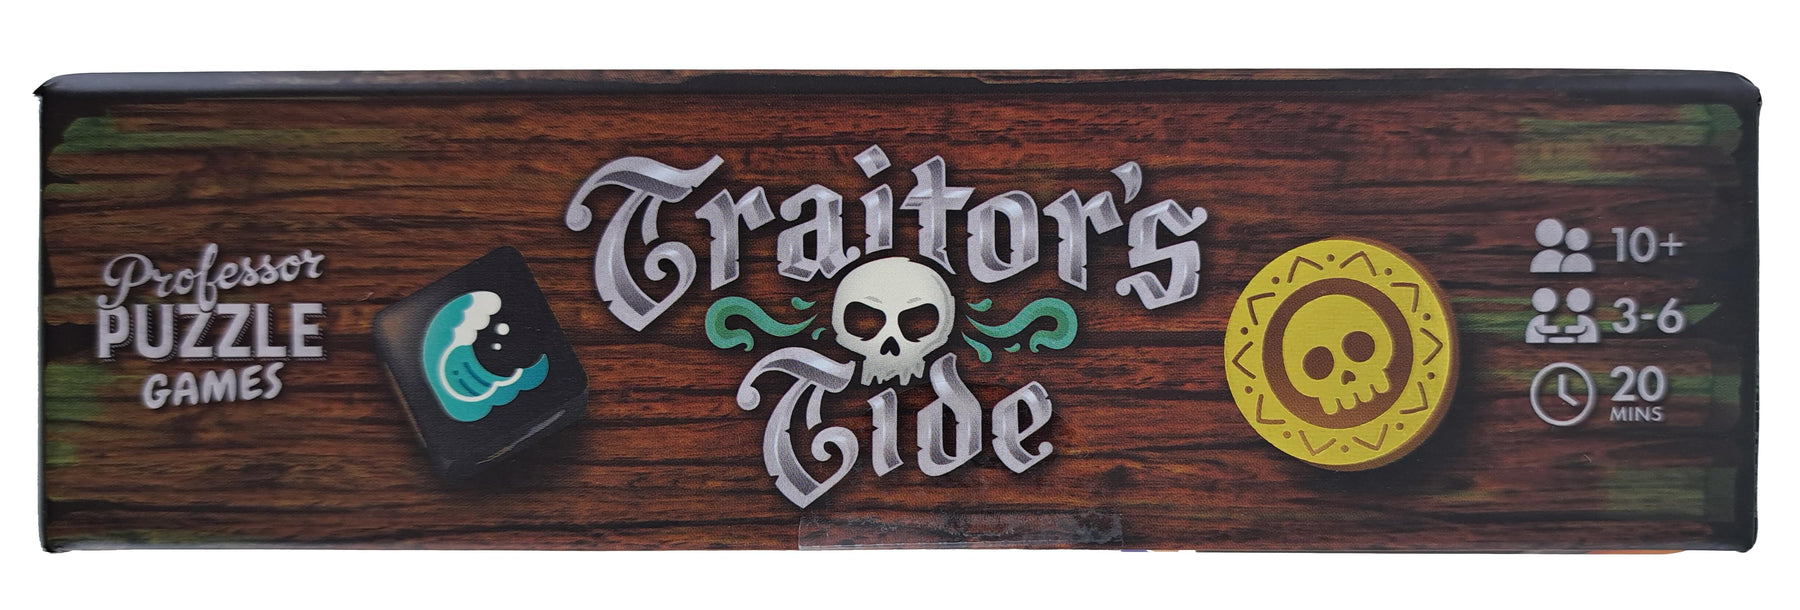 Traitor's Tide Dice Game